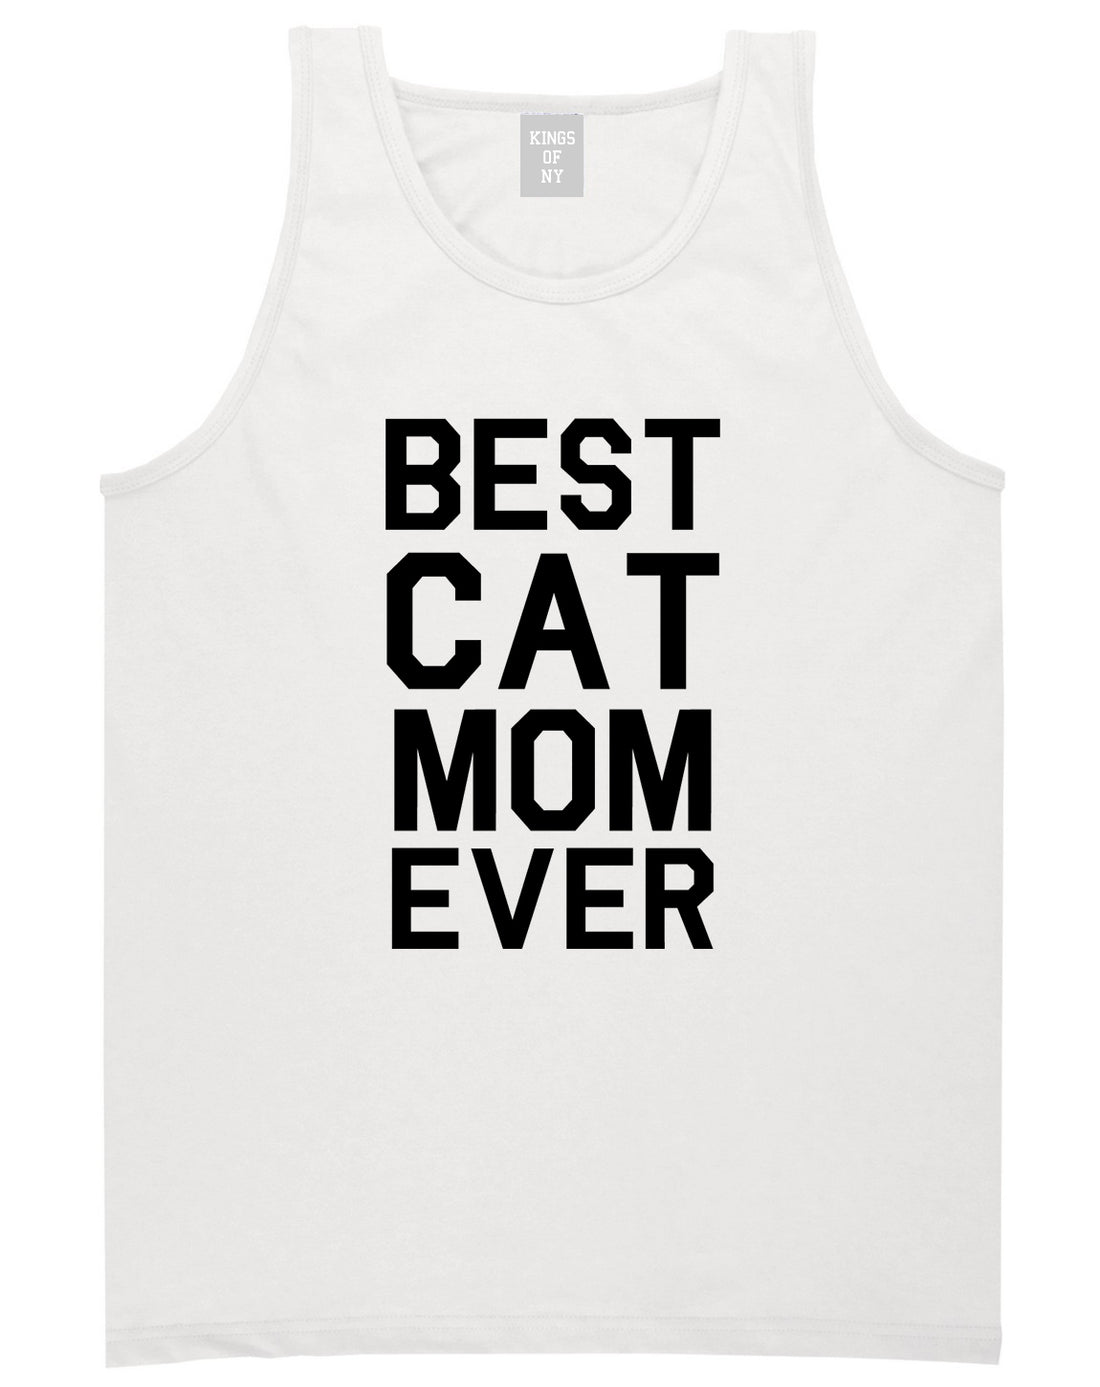 Best_Cat_Mom_Ever Mens White Tank Top Shirt by Kings Of NY